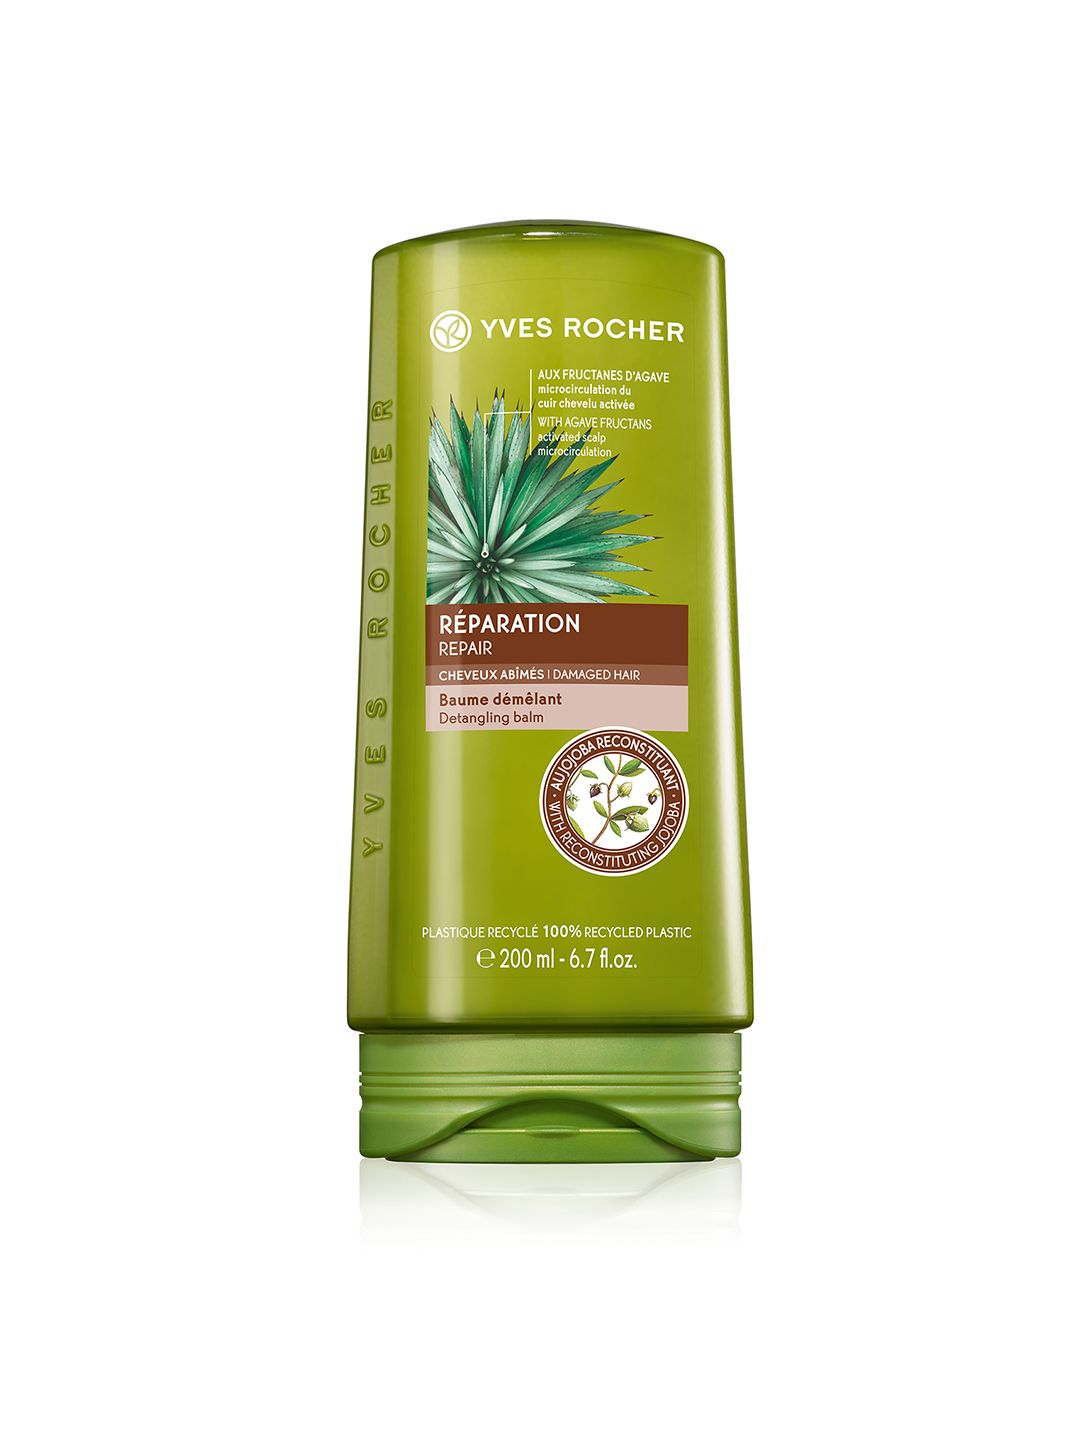 Yves Rocher Repair Detangling Balm Conditioner 200 ml Price in India